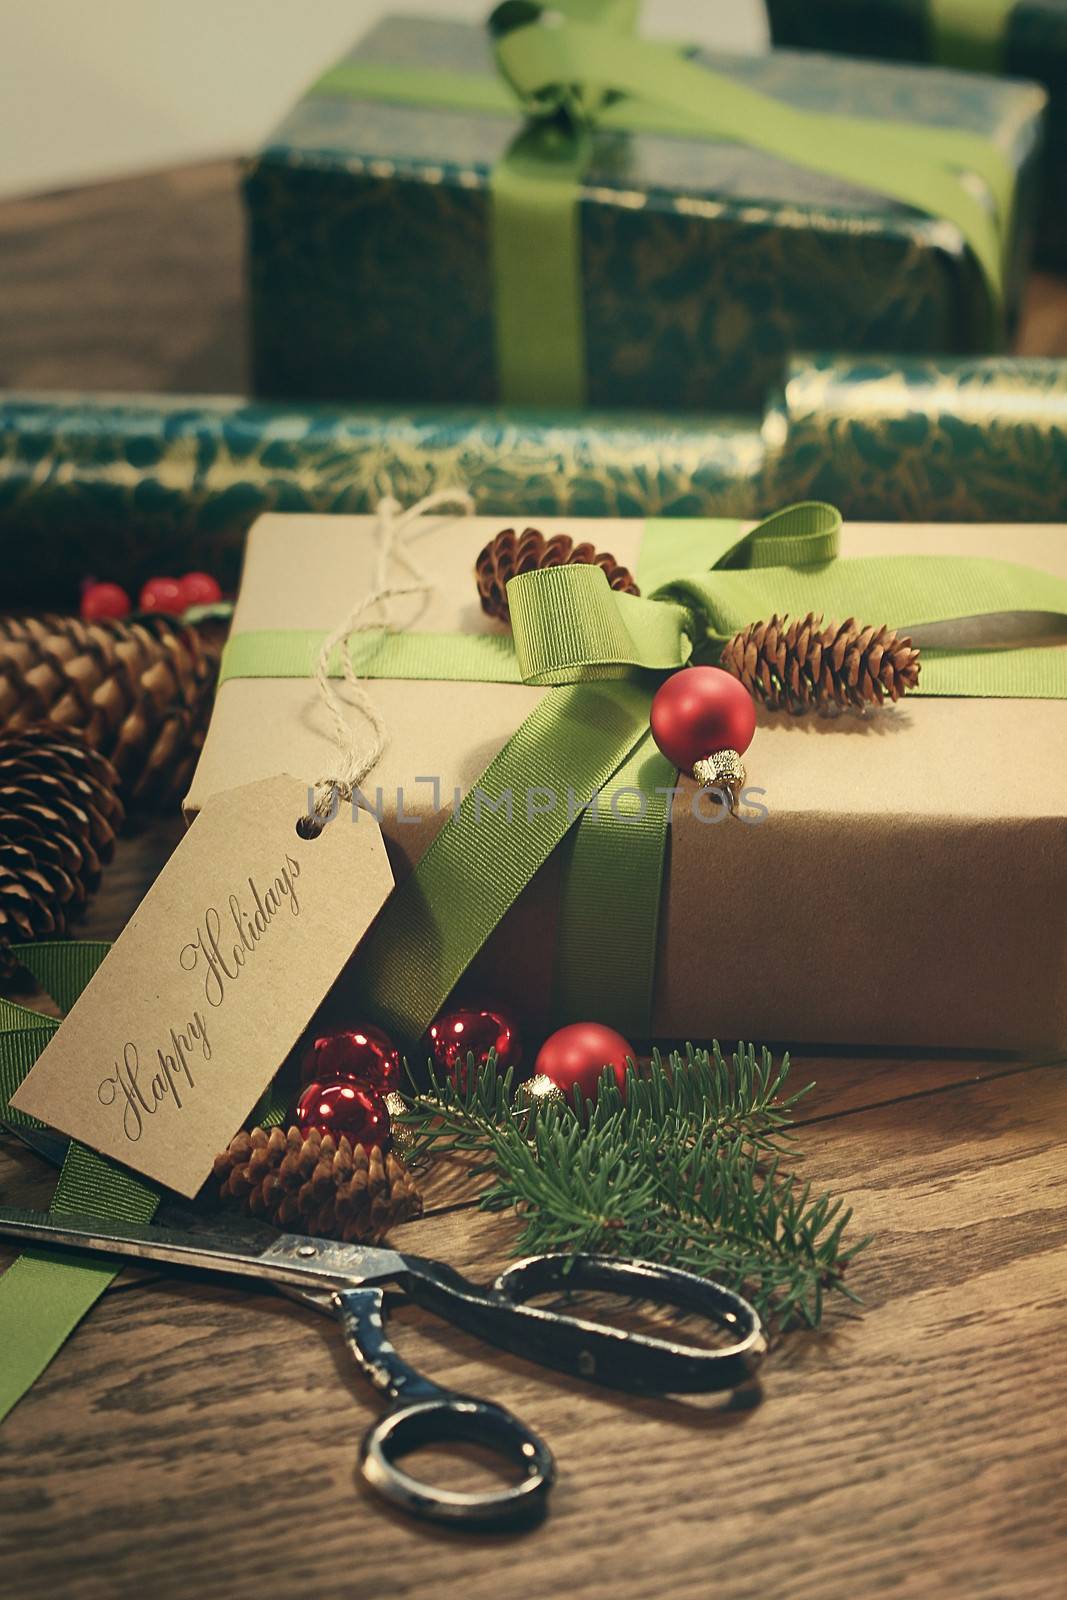 Gifts with tag for the holidays on wood table by Sandralise